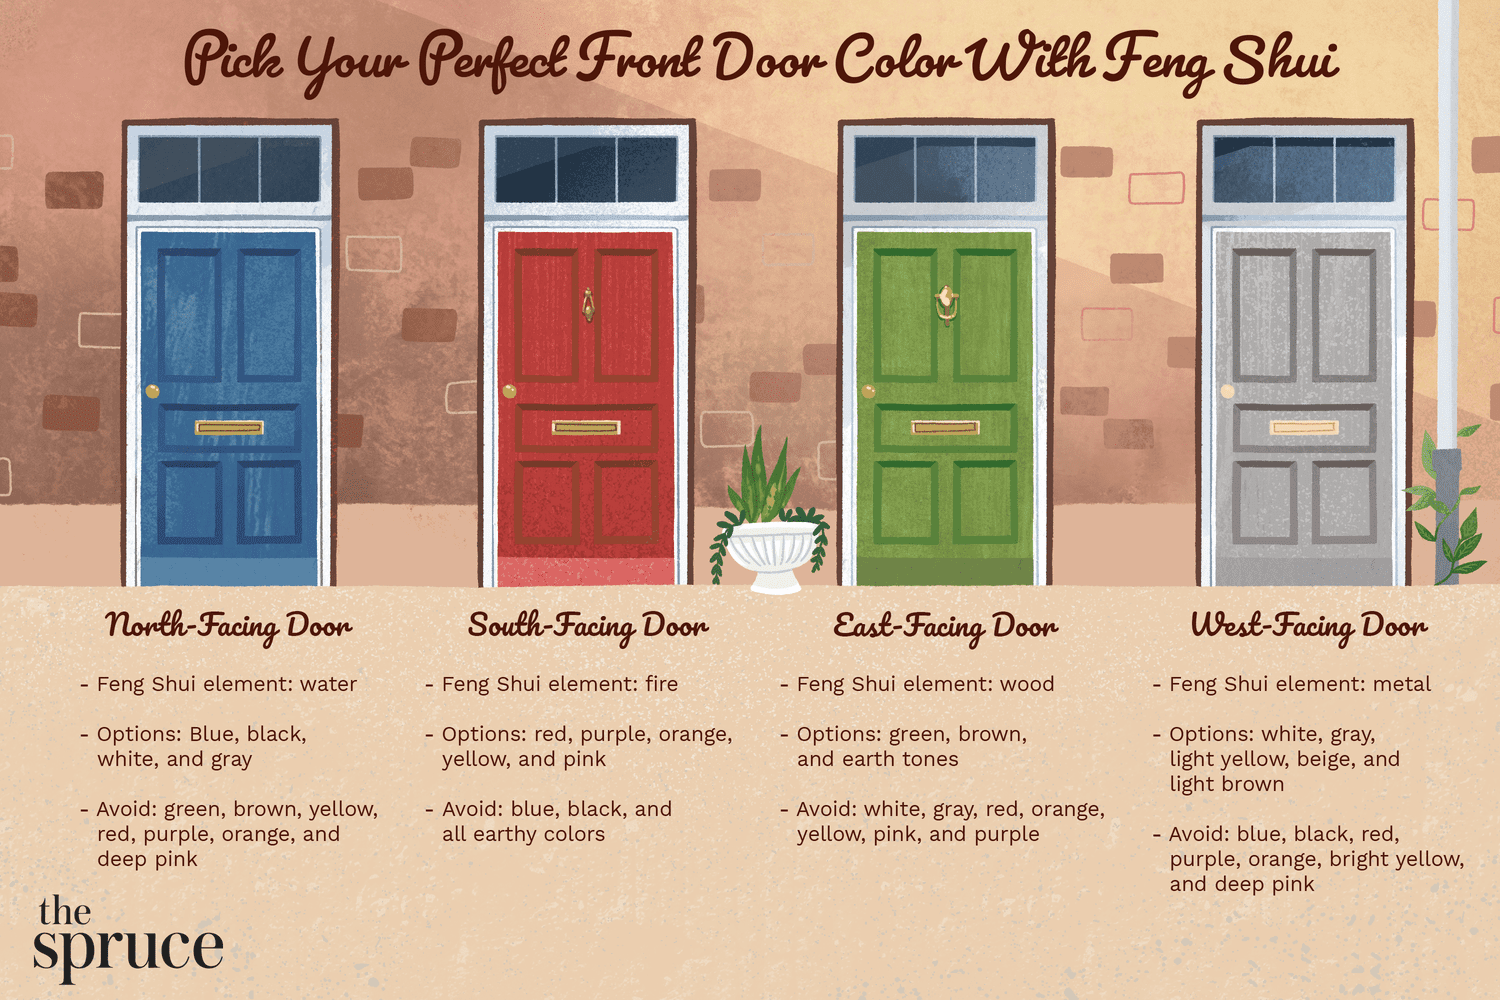 Feng Shui front door colors – 10 ways to use its principles when choosing a color scheme